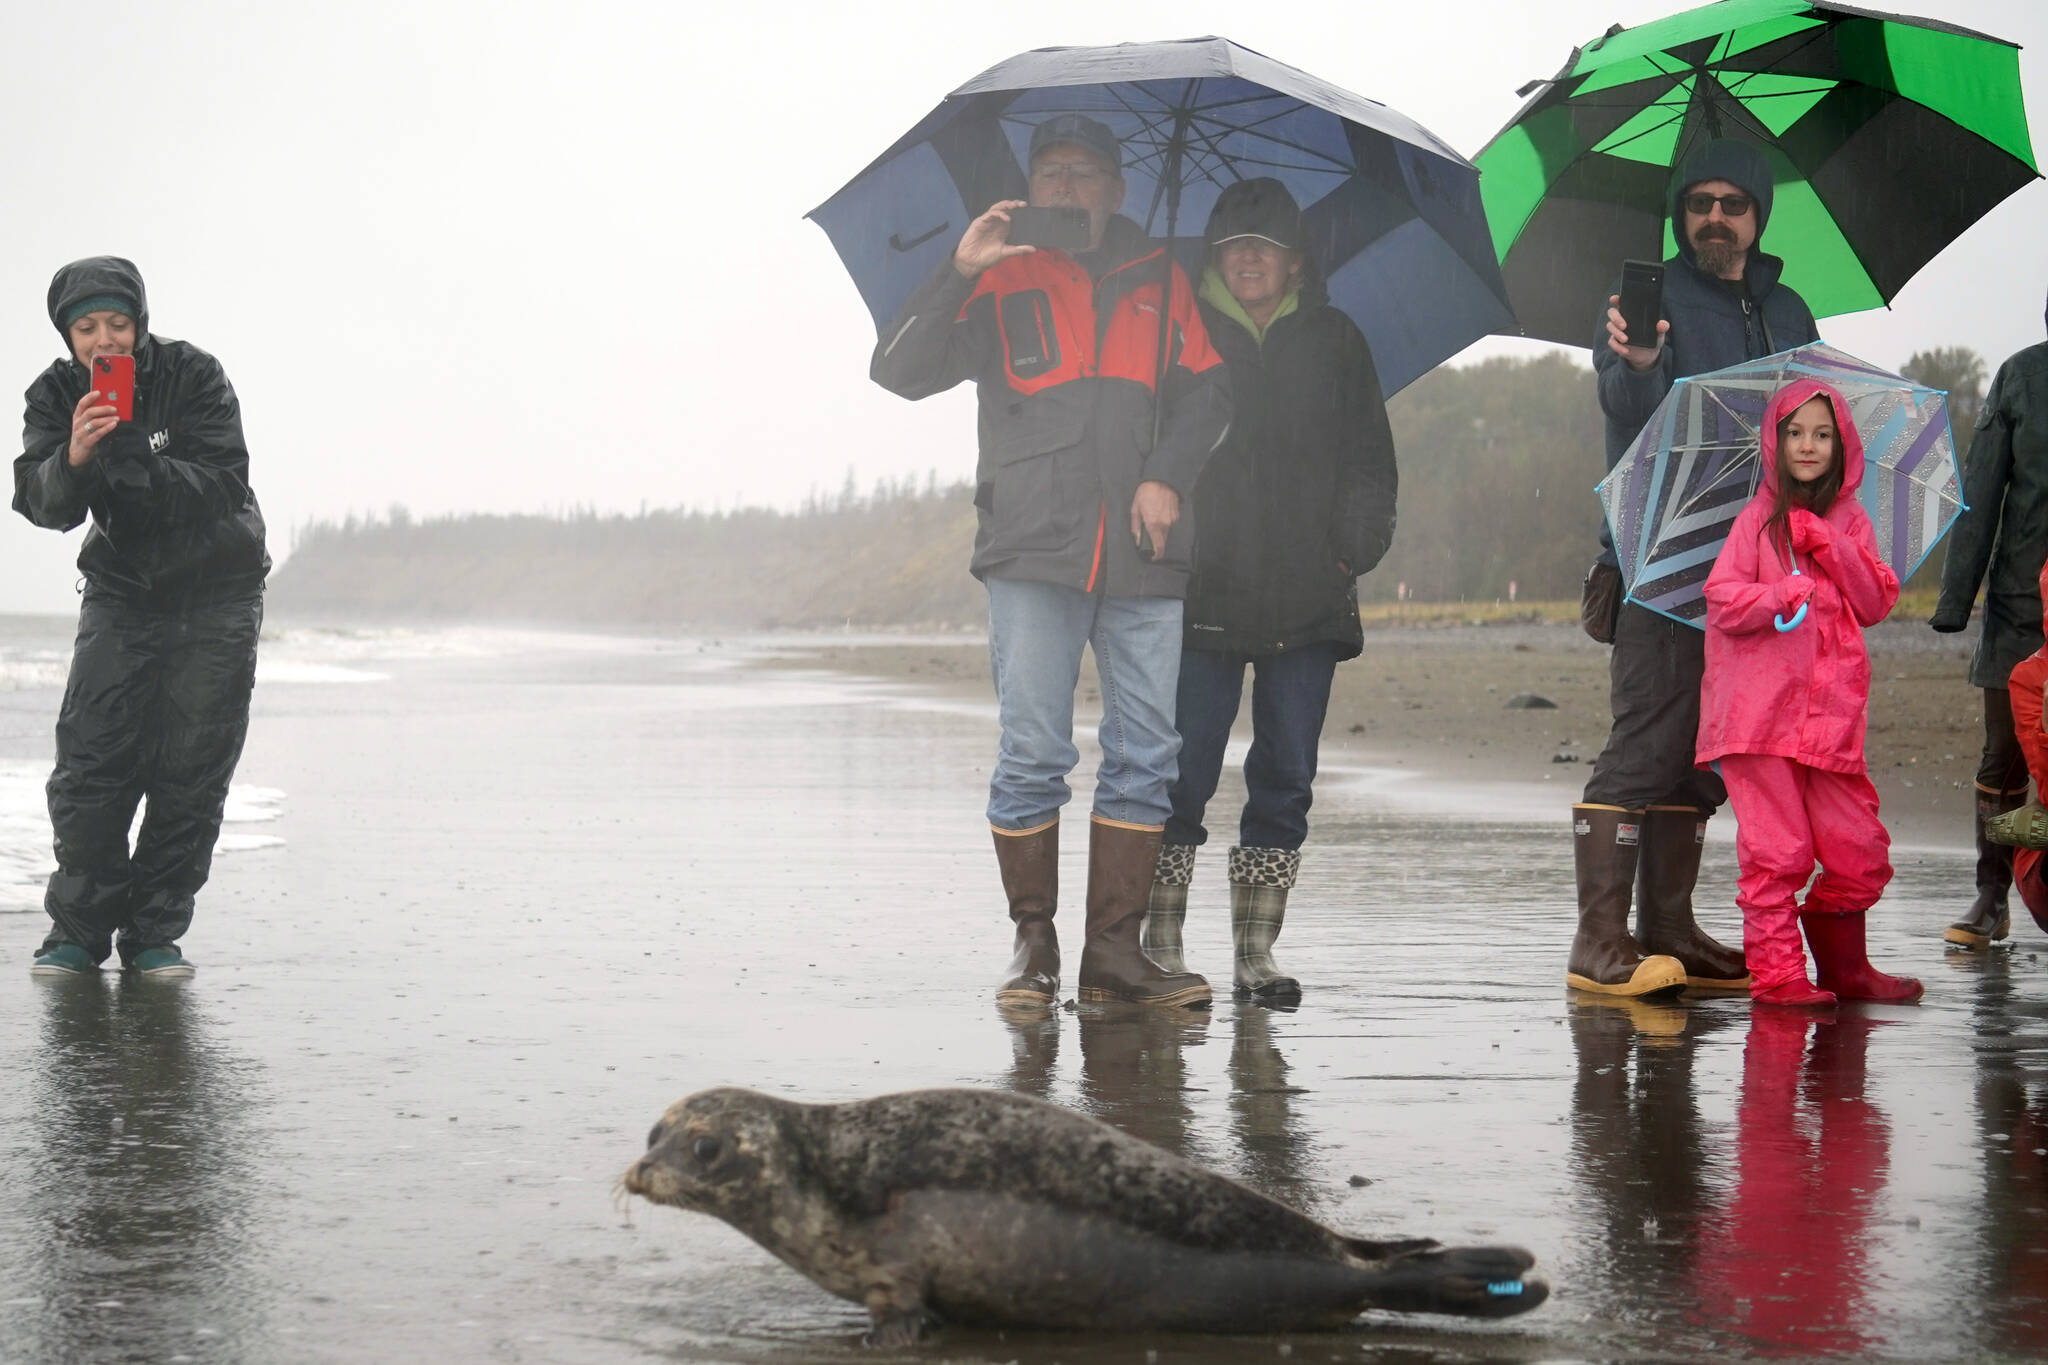 A harbor seal rescued earlier this year by the Alaska SeaLife Center, Darth Tater, enters the waters of Cook Inlet before crowds and cameras on the Kenai Beach in Kenai, Alaska, on Thursday, Sept. 7, 2023. (Jake Dye/Peninsula Clarion)